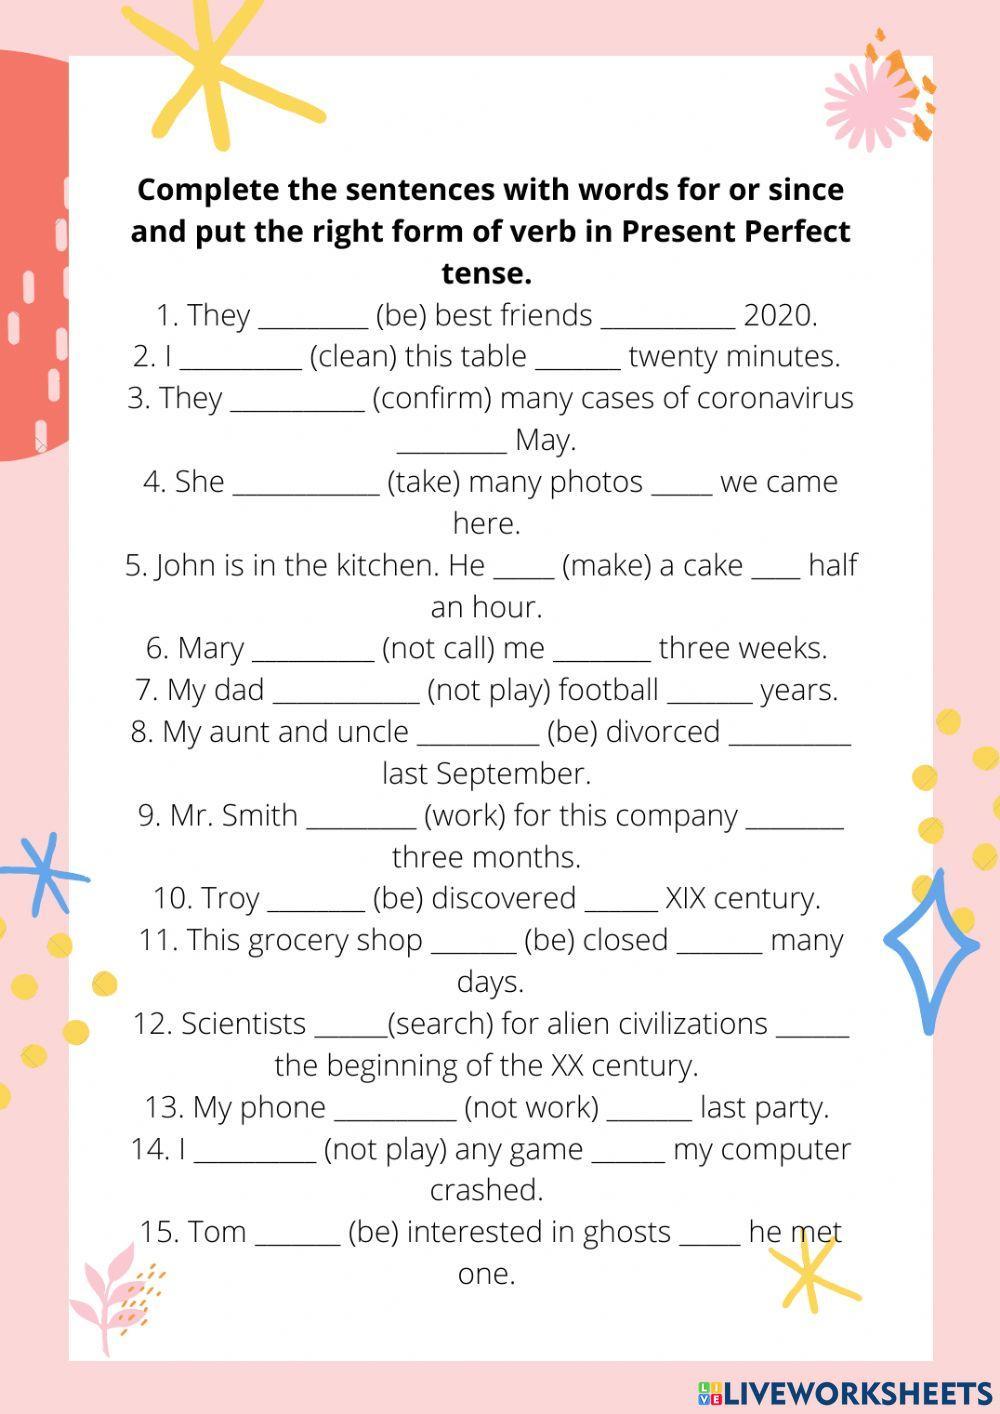 Present Perfect exercise - for or since?